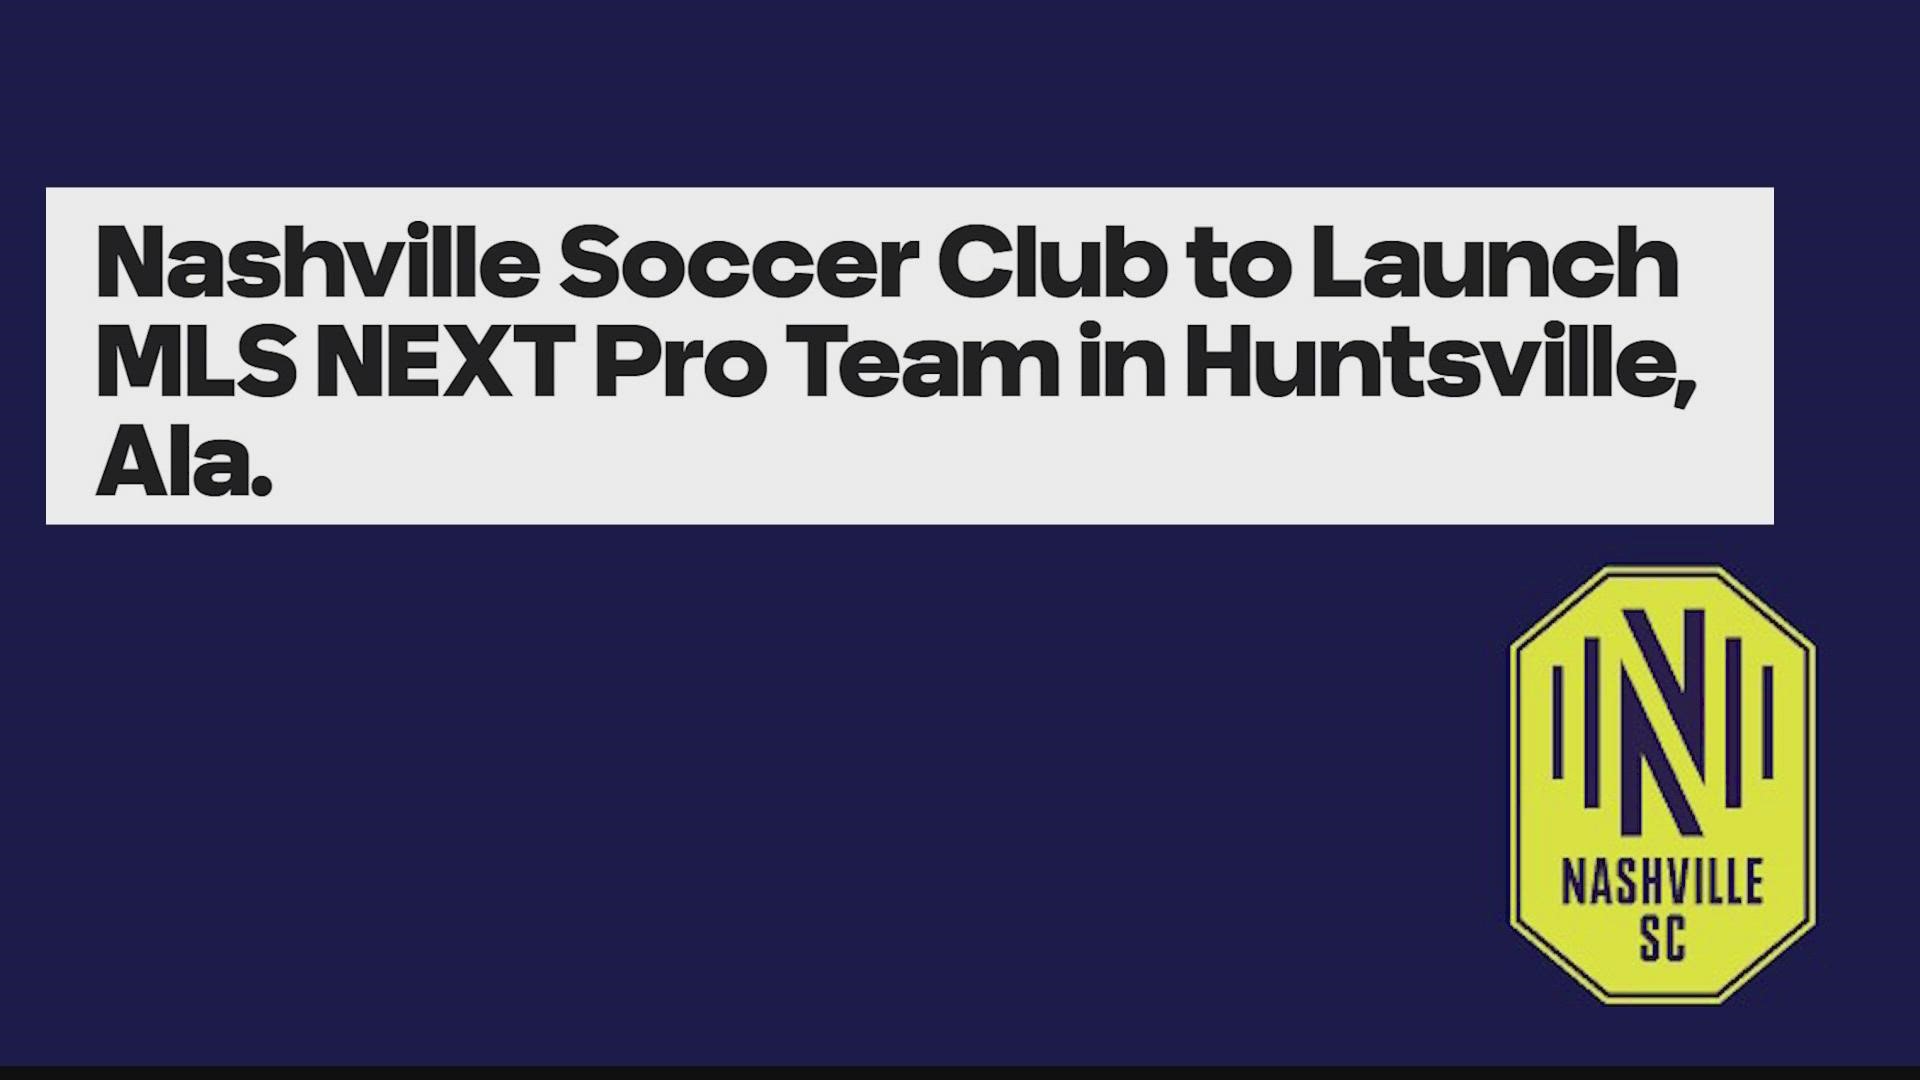 The City of Huntsville made a big announcement today as they renovate the Joe Davis Stadium. We'll be welcoming Nashville's MLS Next Pro Soccer team!